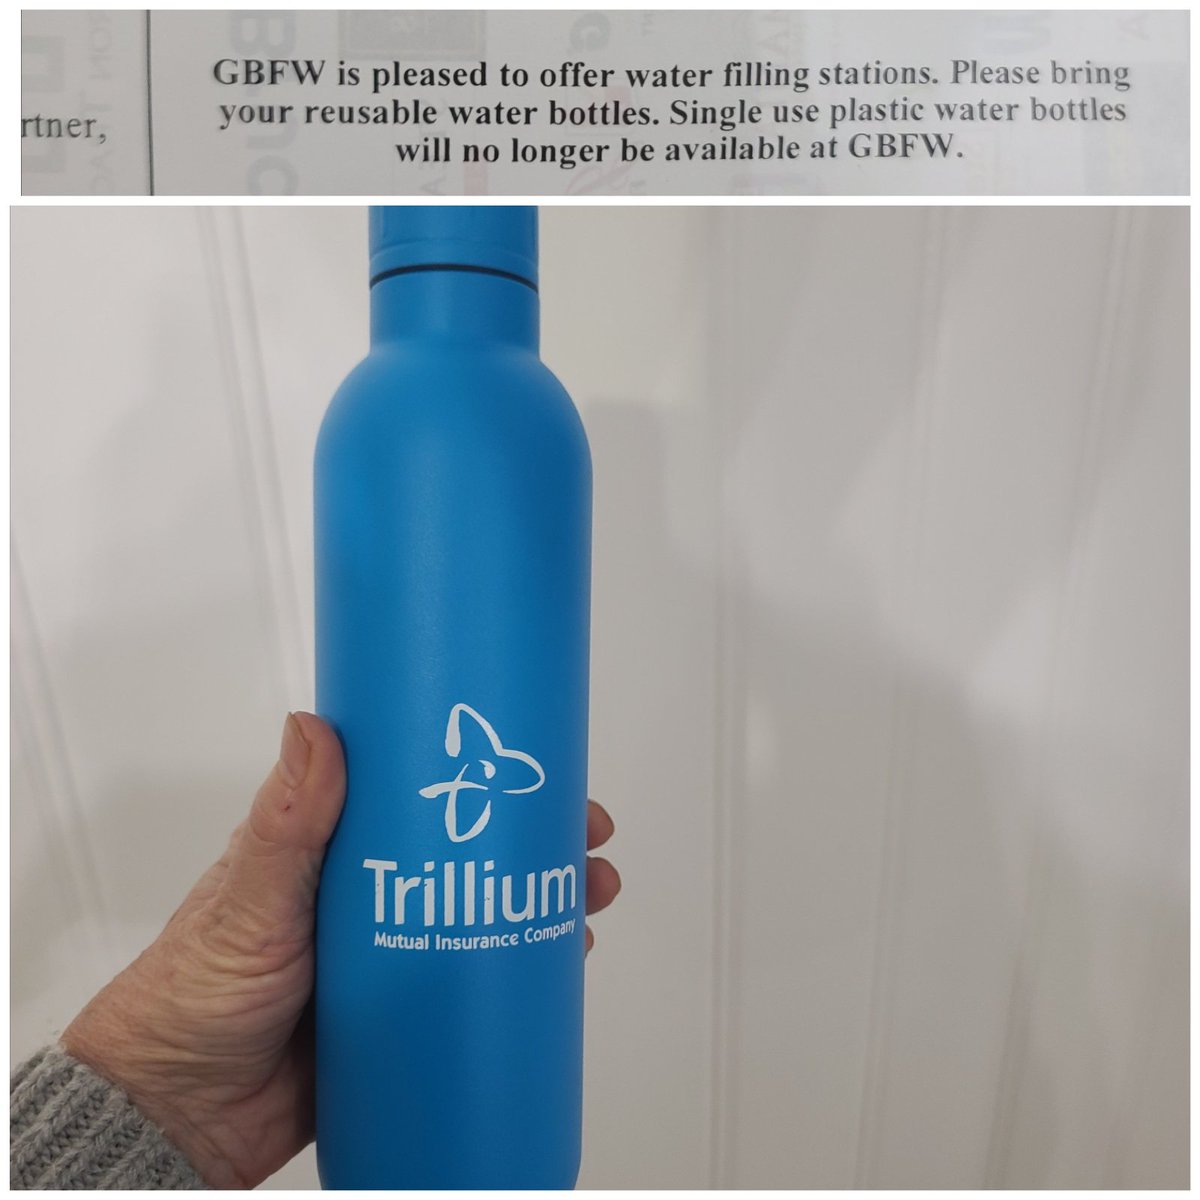 Good idea Grey Bruce Farmers Week  Happy to bring along my favourite refillable water bottle to the conference Reduce waste. 
#GBFW23